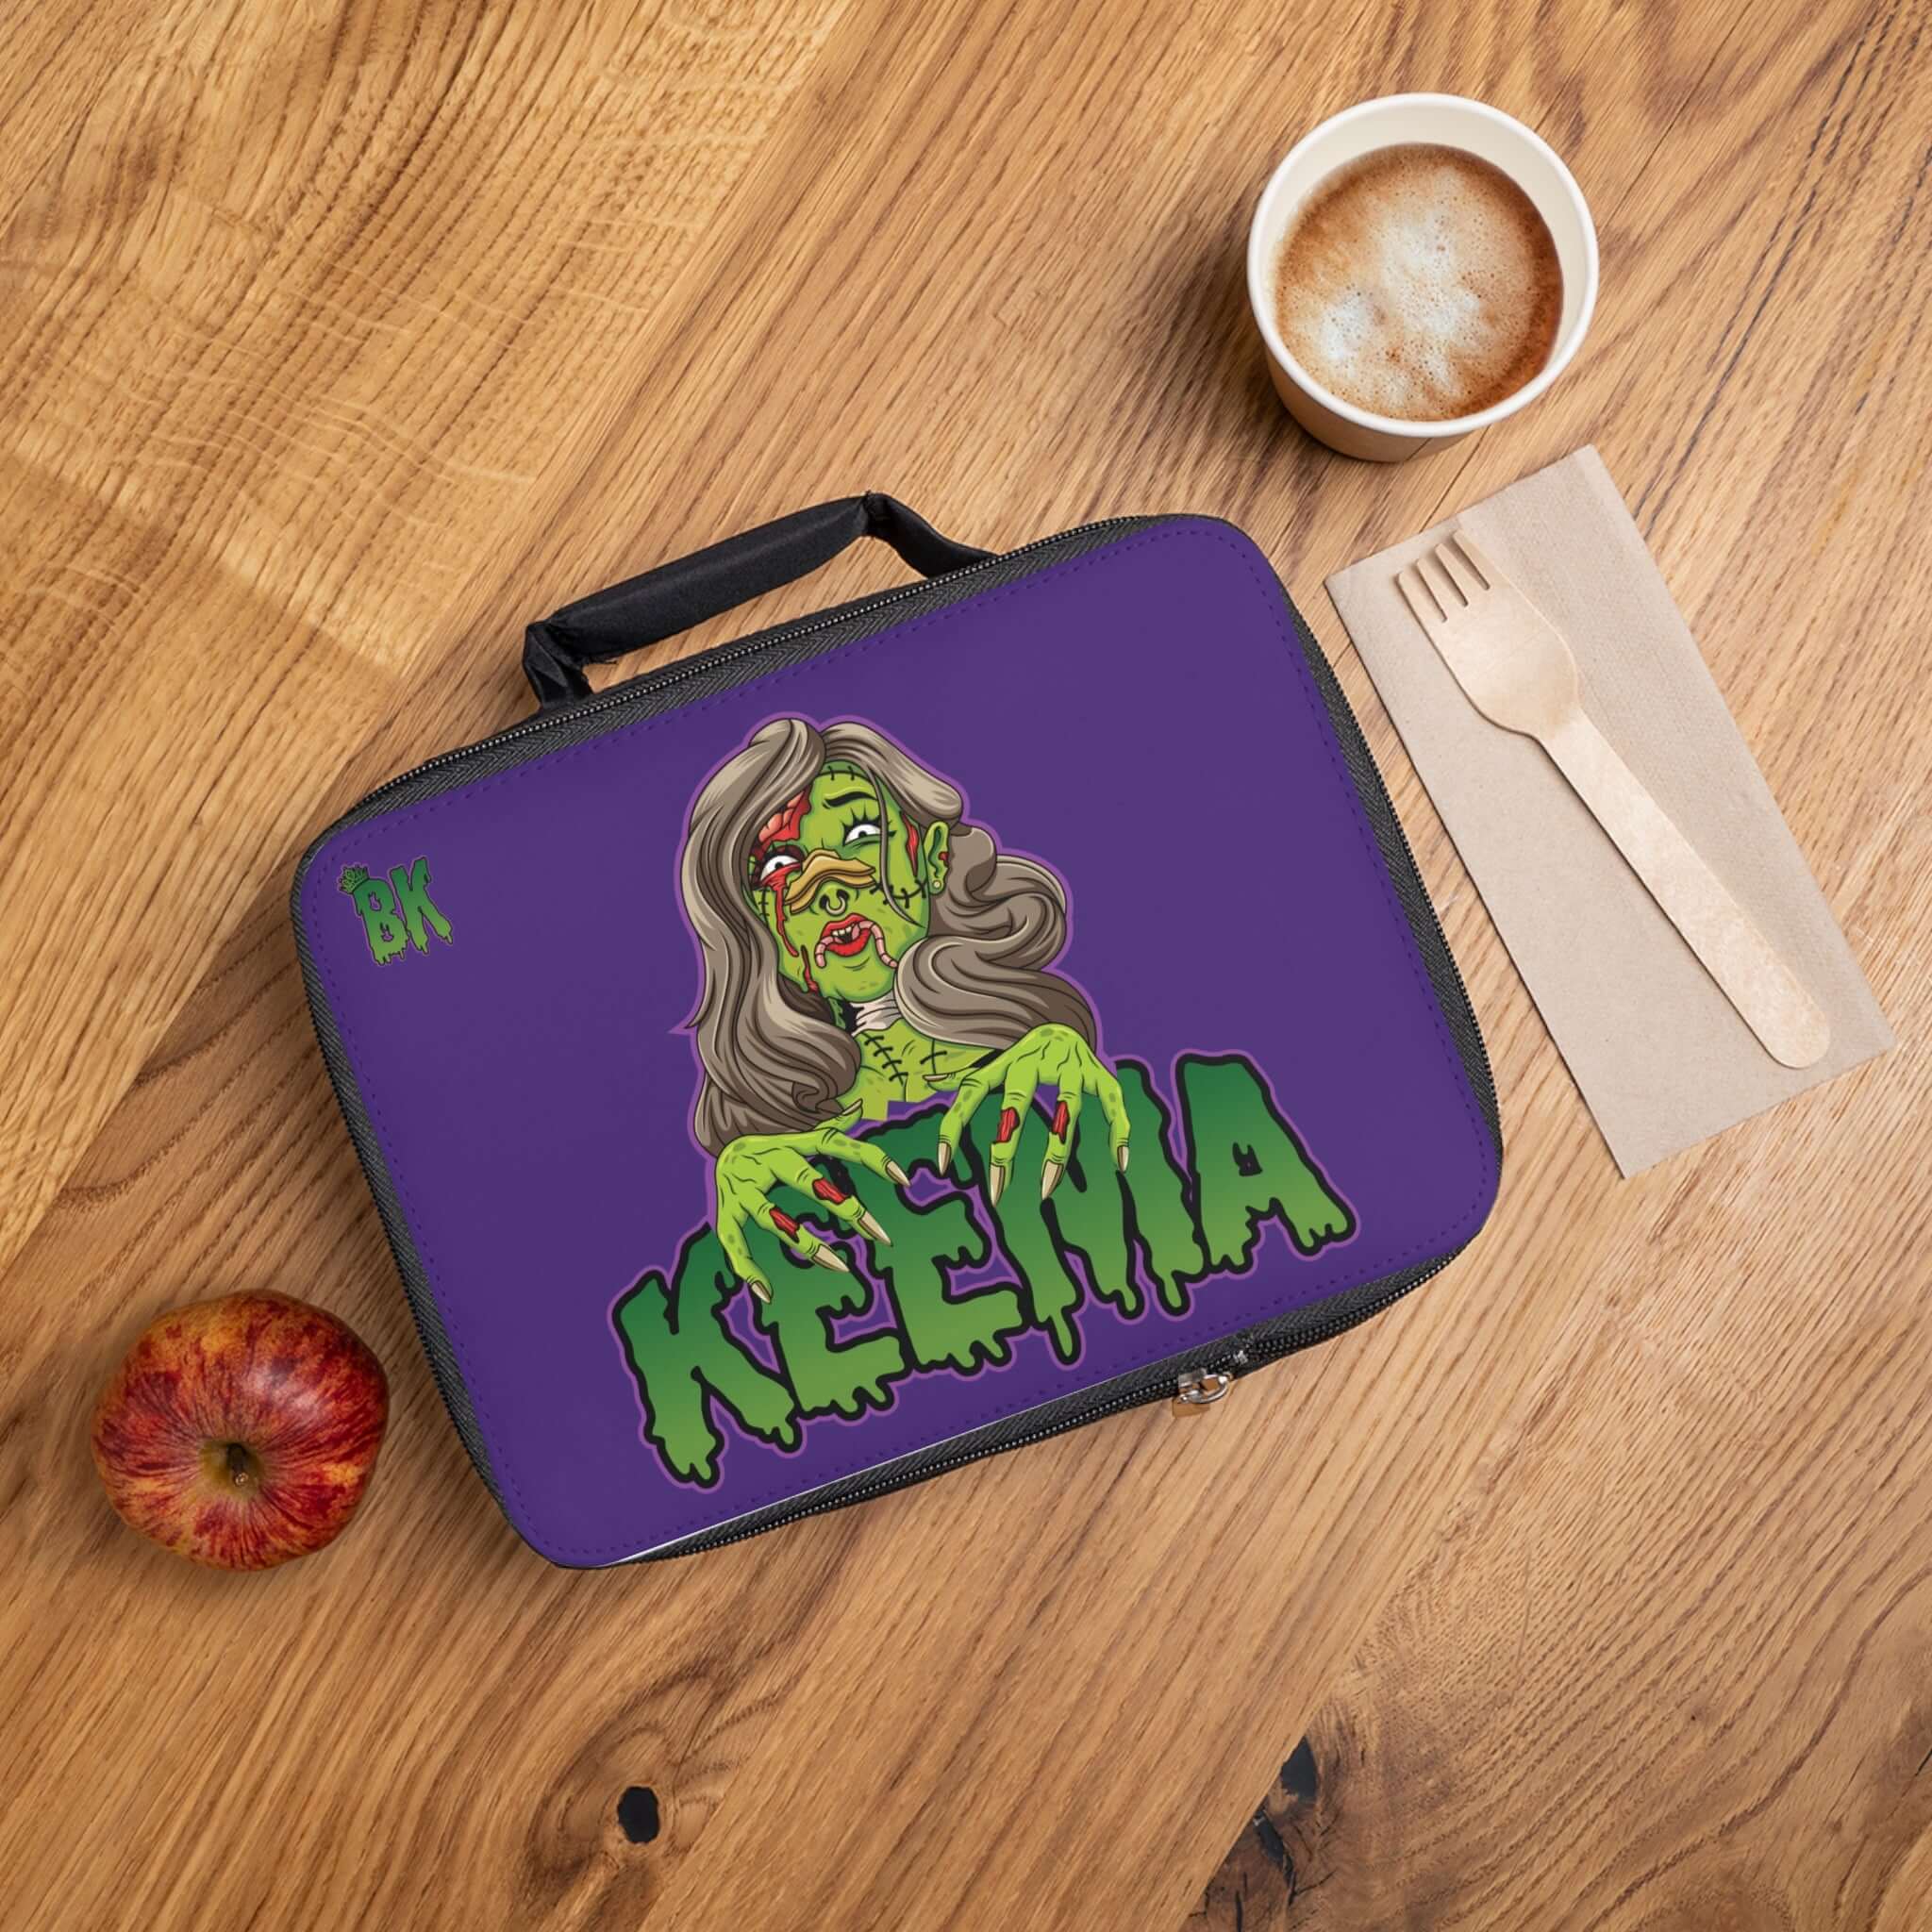 Limited Edition Keema Lunch BagLimited Edition Keema Lunch Box Now Avaliable...... Get Yours Today.......